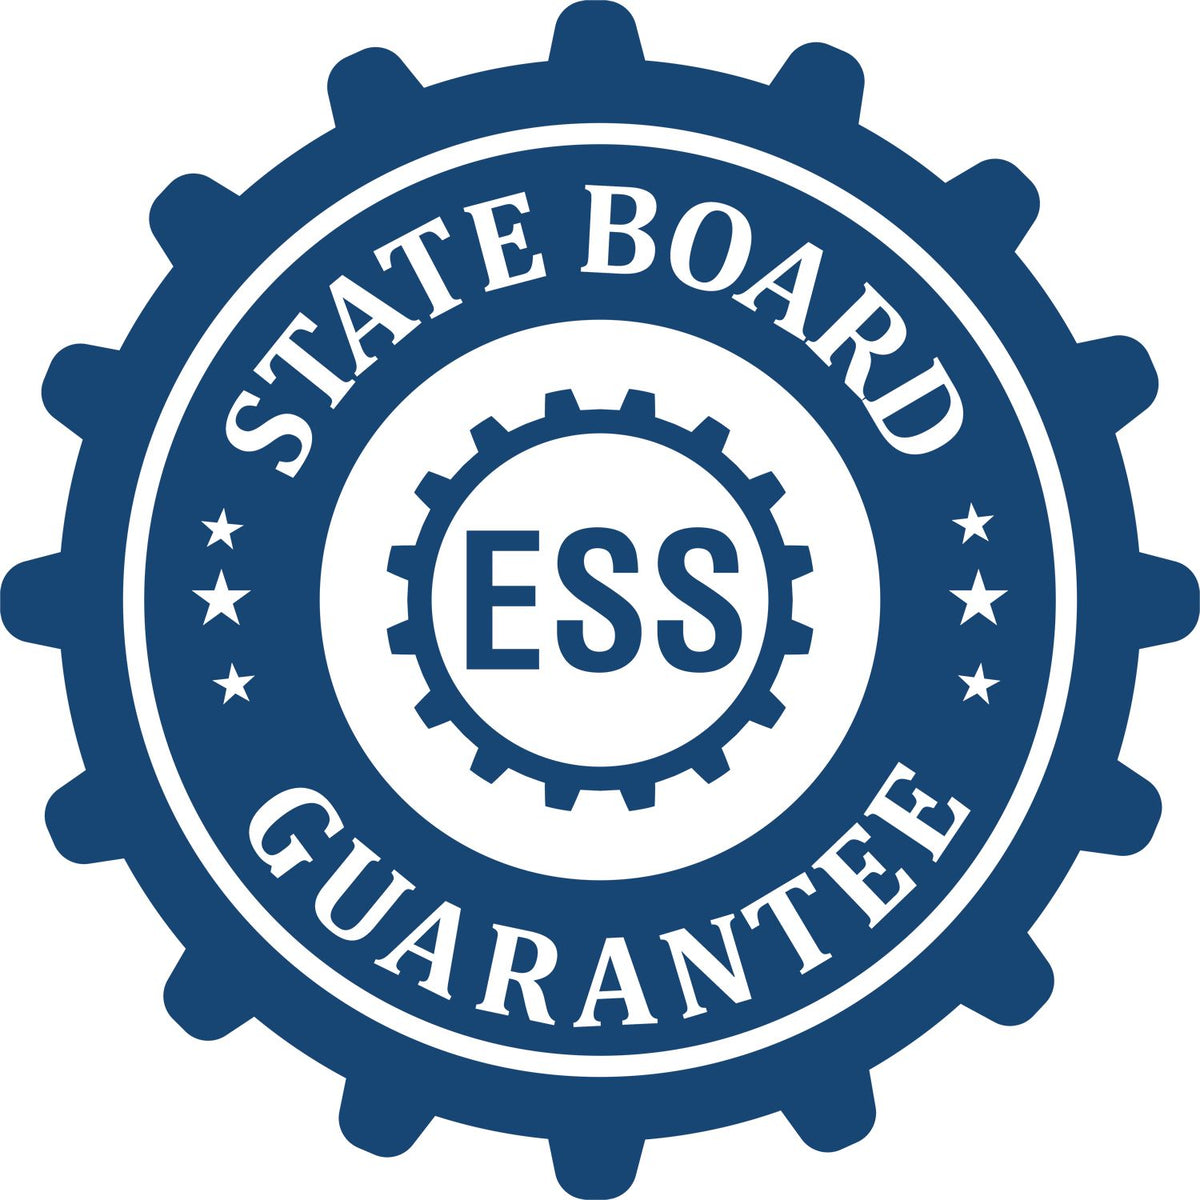 An emblem in a gear shape illustrating a state board guarantee for the Digital Guam Landscape Architect Stamp product.